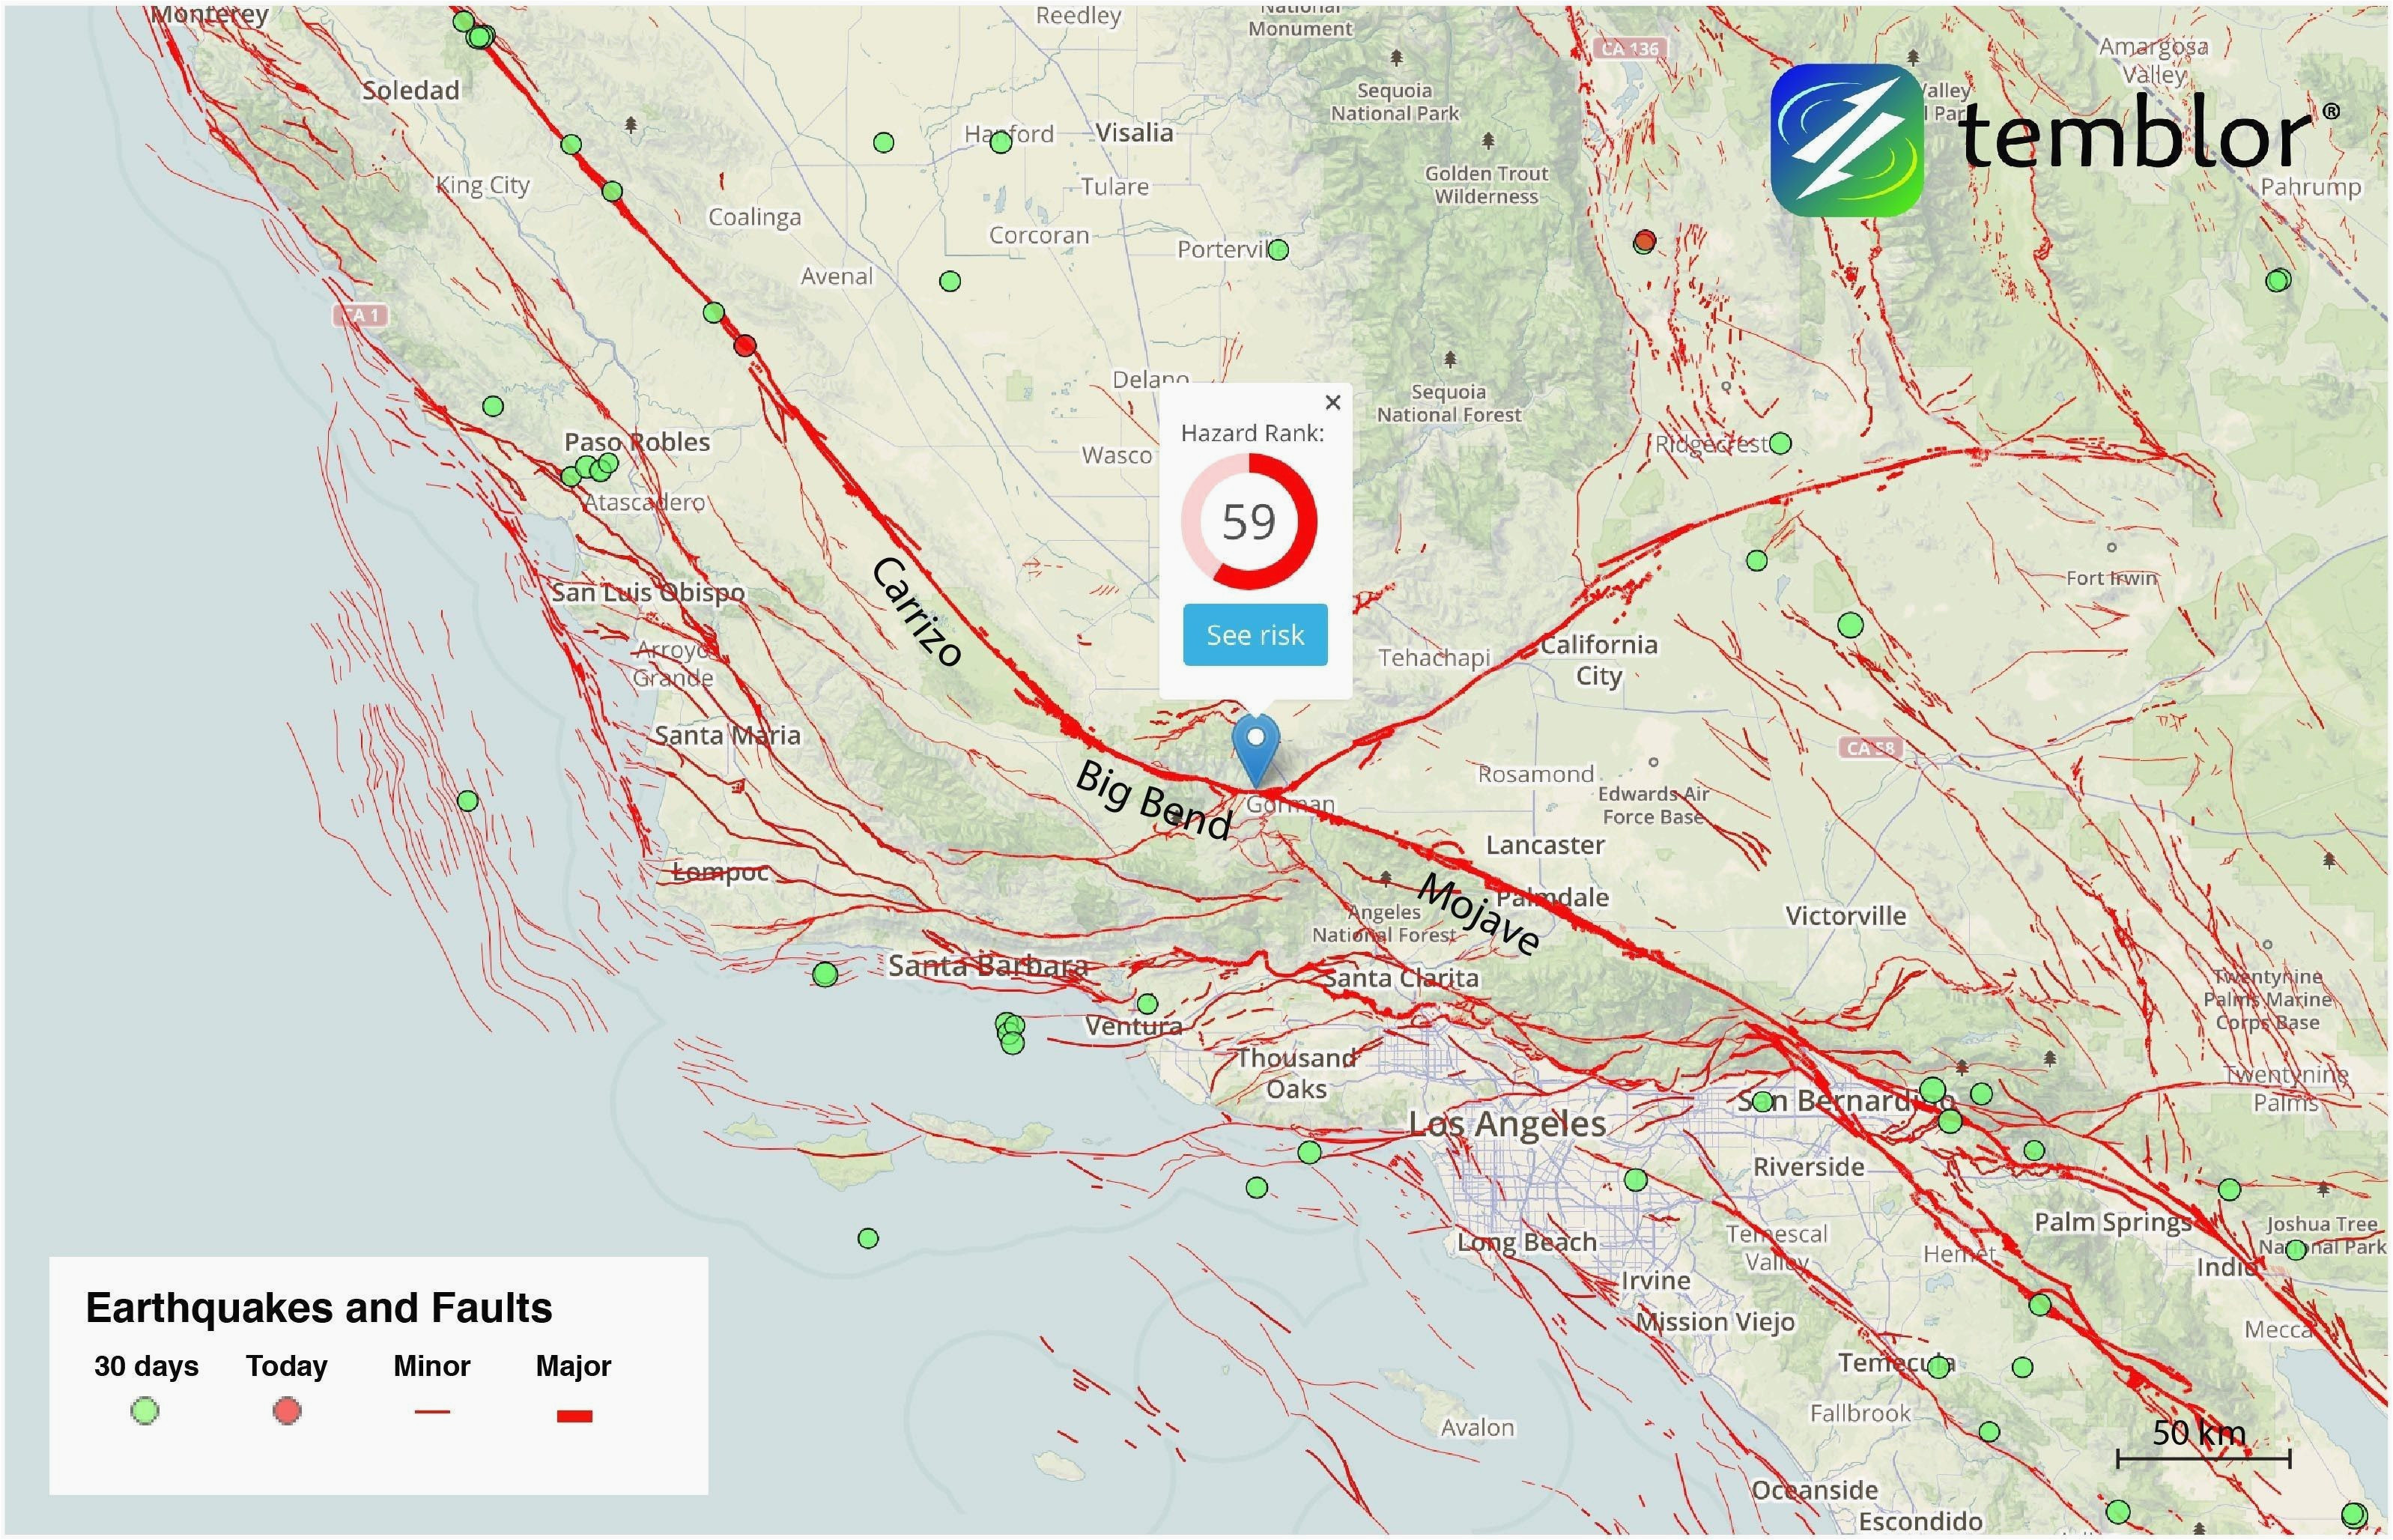 map of earthquakes in california us earthquake map awesome